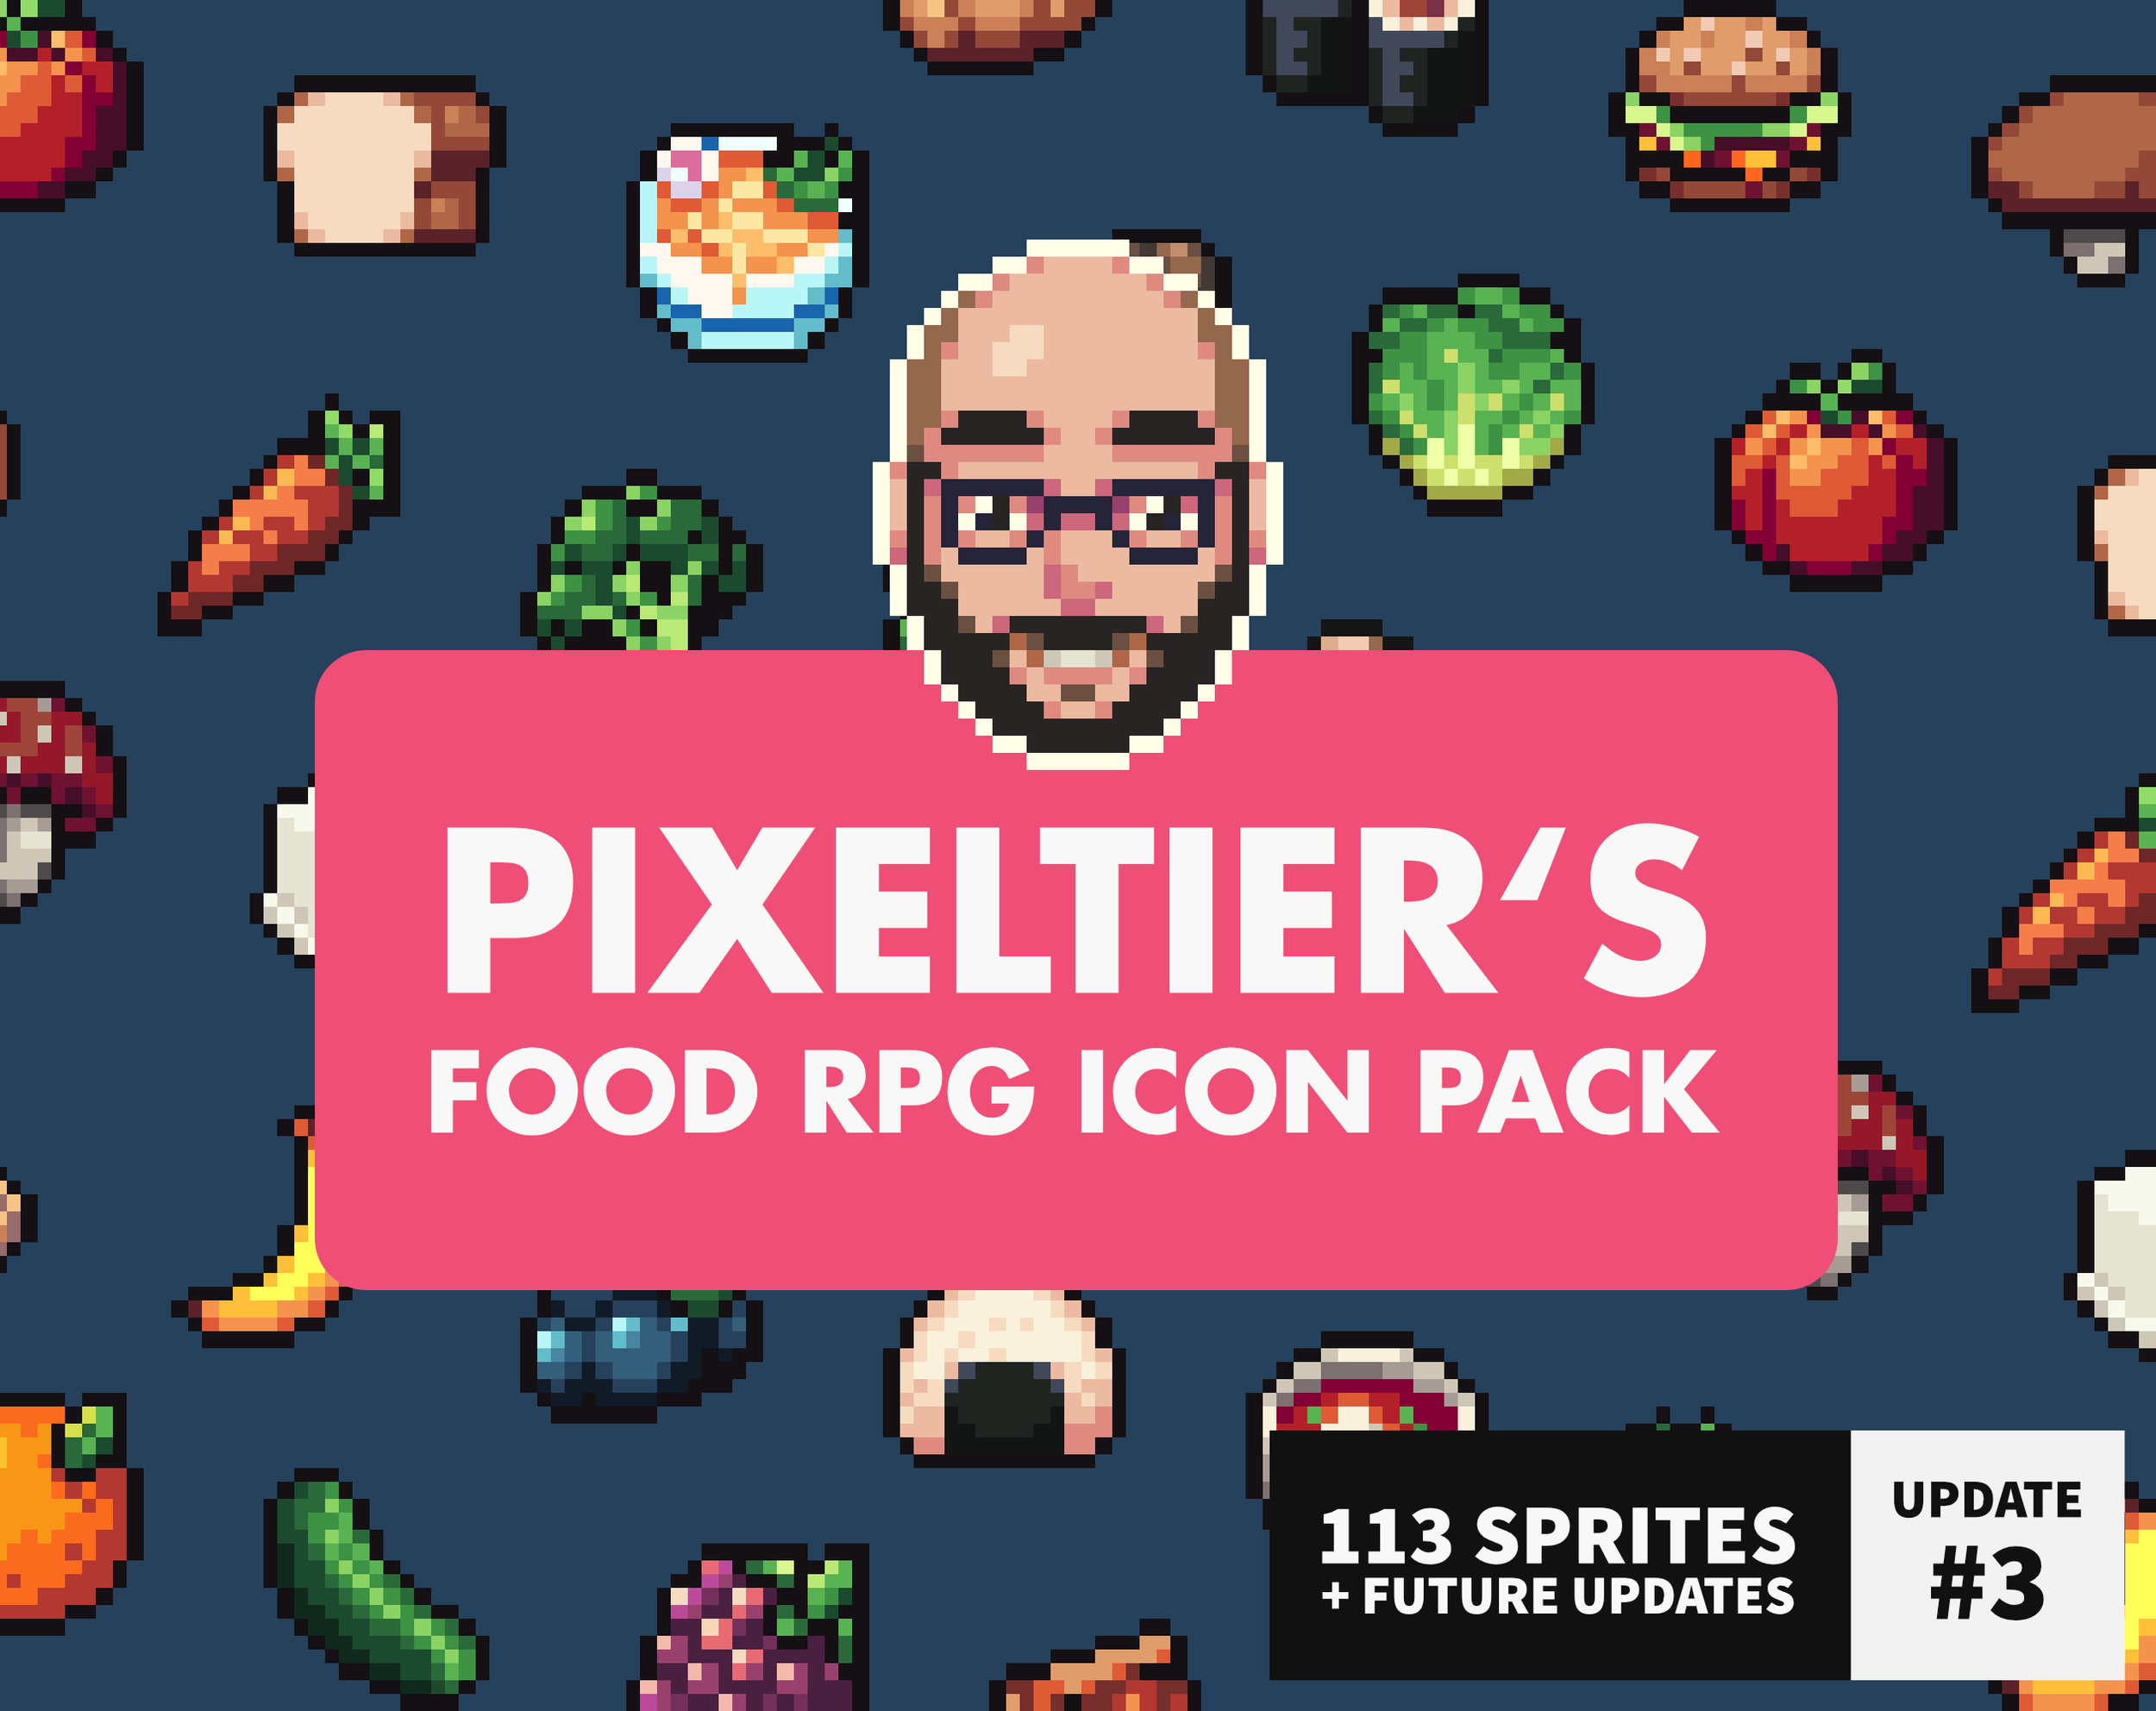 Pixeltier's 16x16 Food RPG Icon Pack